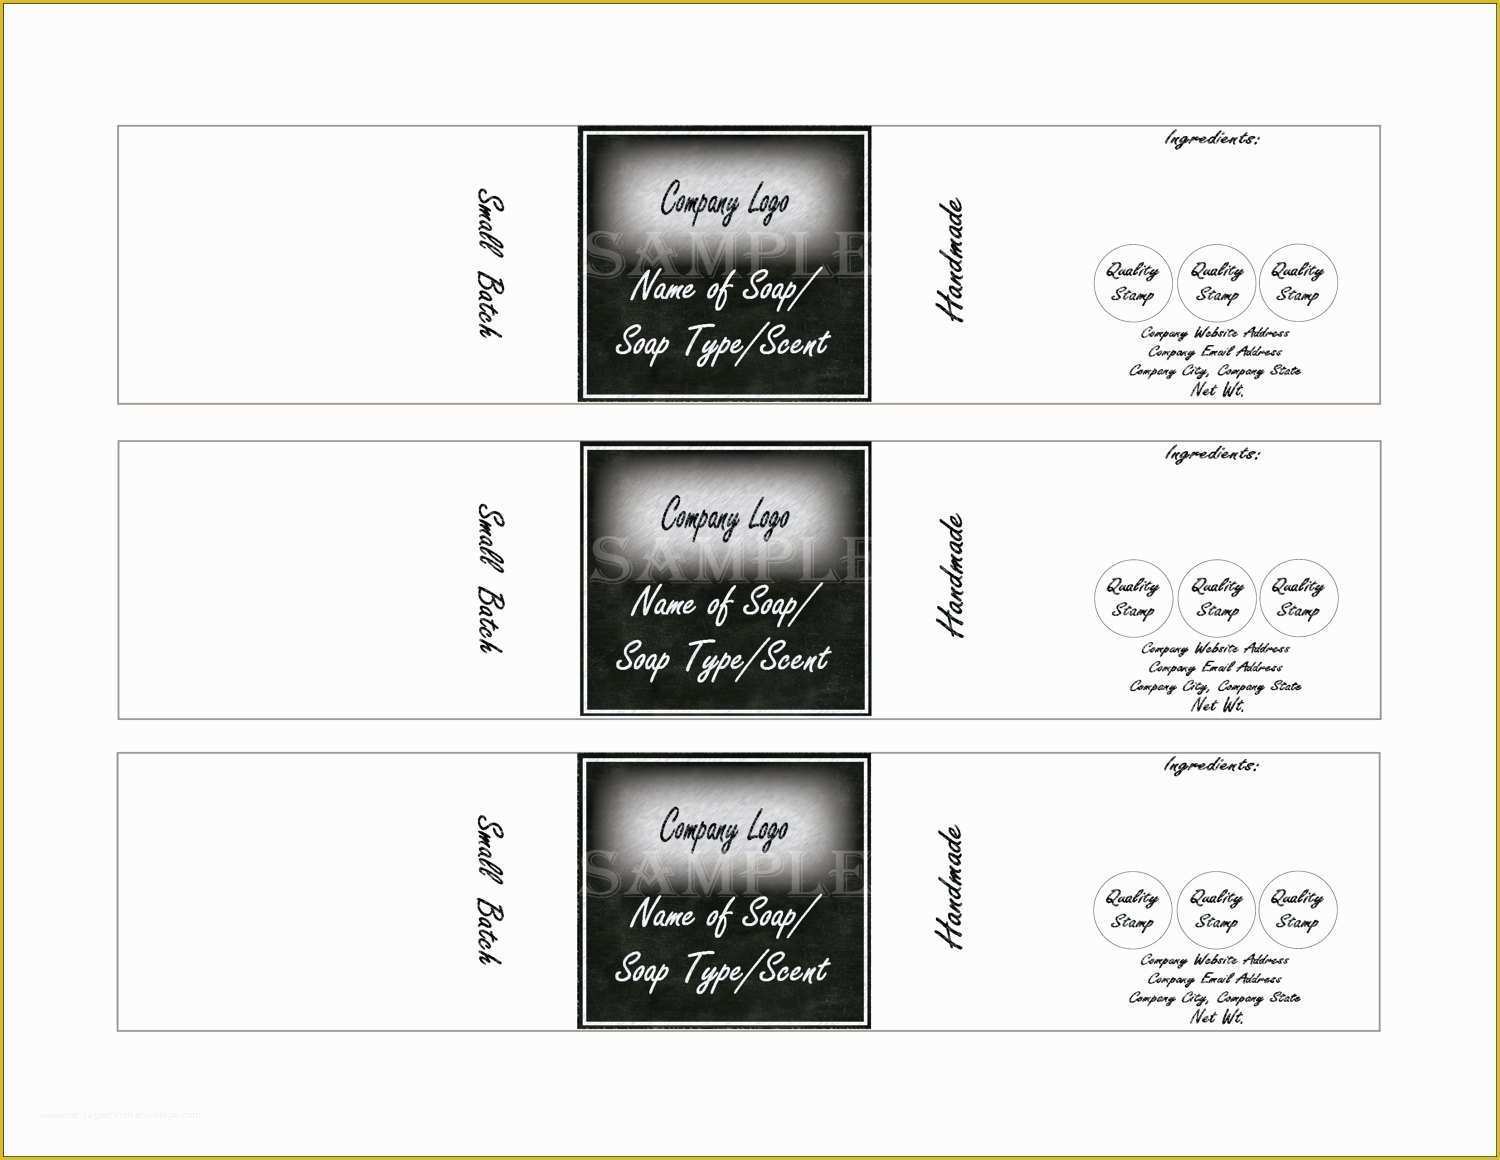 free-soap-label-templates-of-soap-label-template-printable-4-files-4-diy-2-x-10-blank